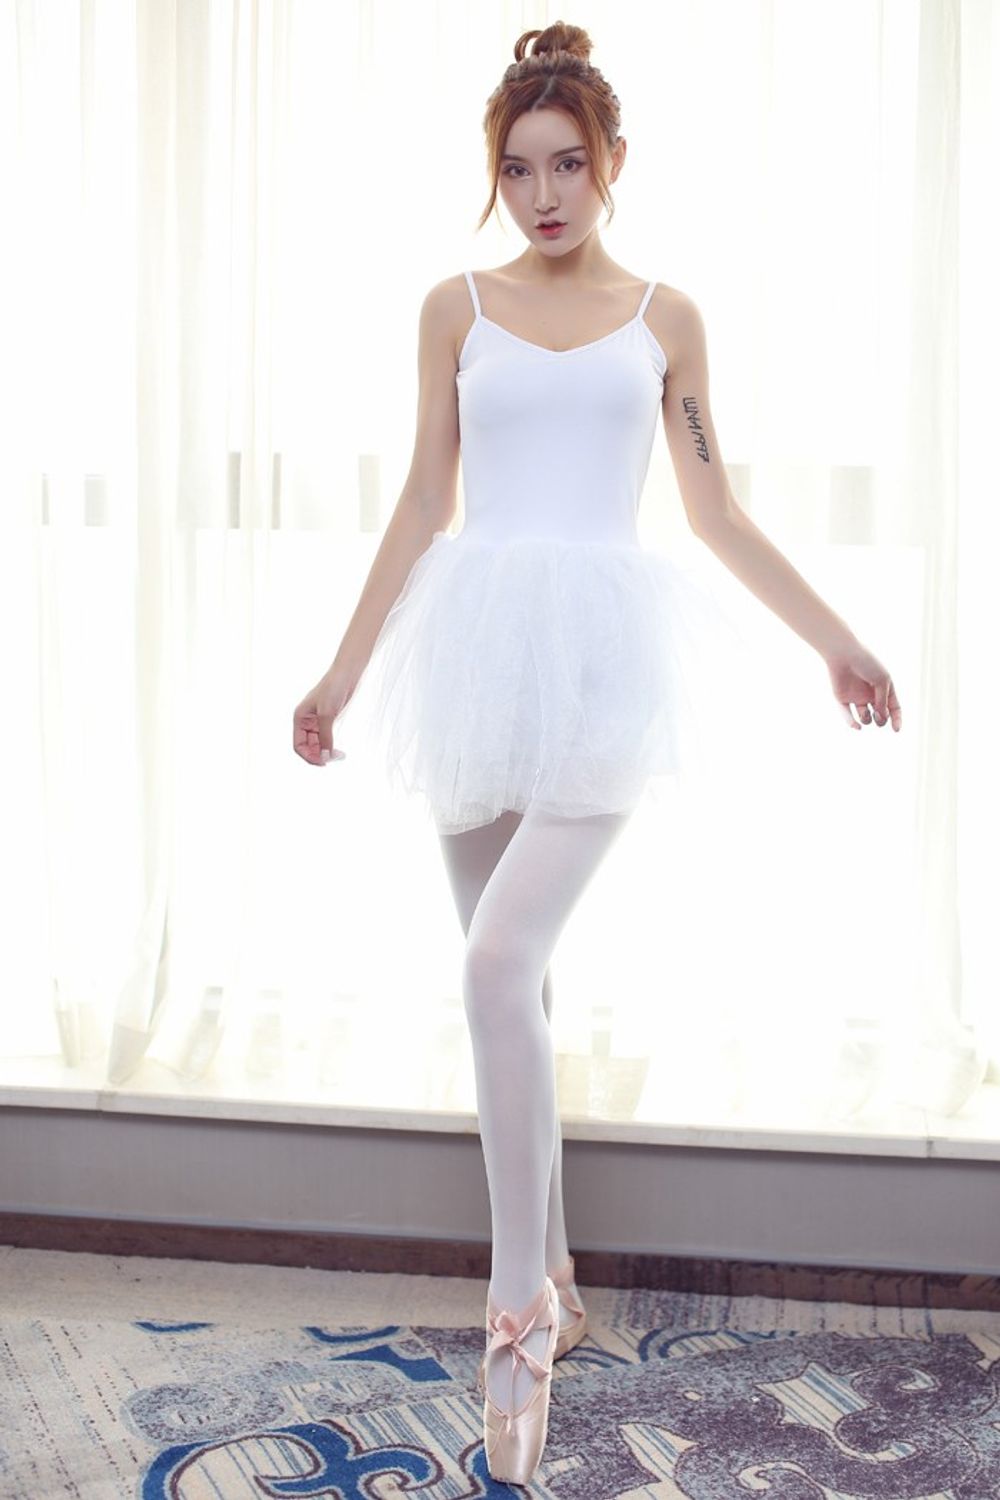 Hot young girl M Mengbaby ballet uniform shows beautiful buttocks